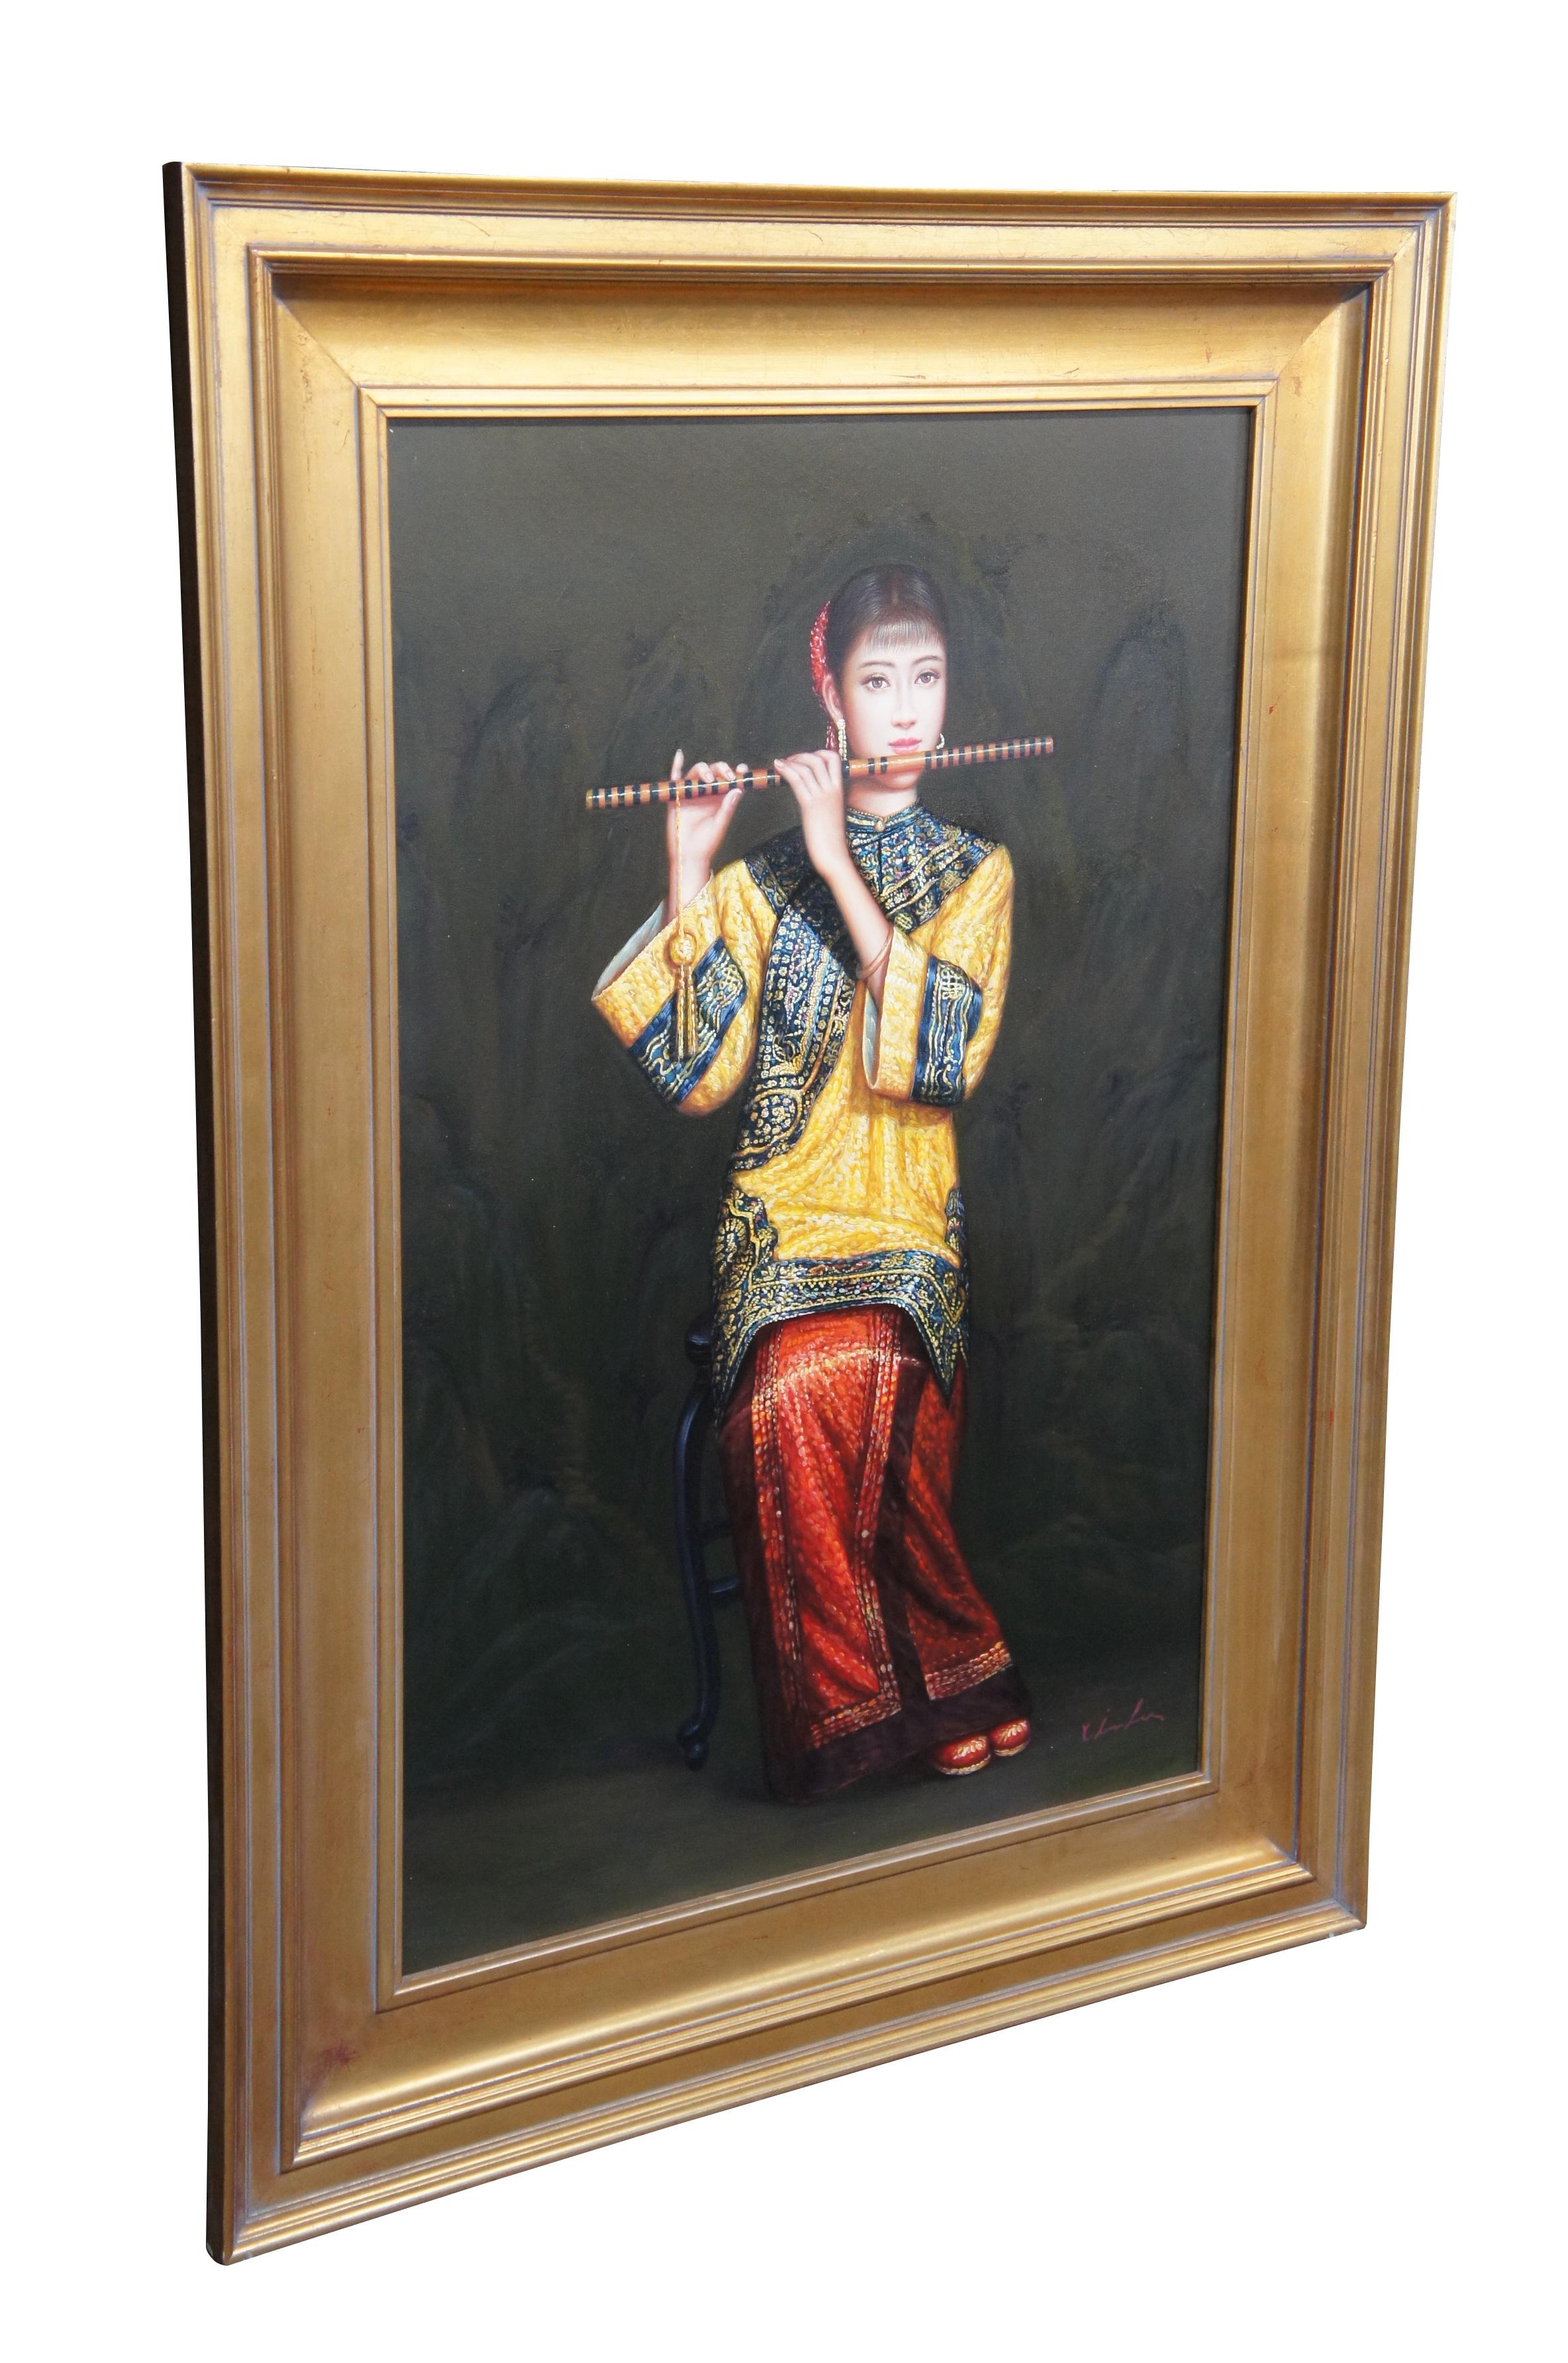 Vintage Chinese woman playing flute oil painting on canvas after Chen Yifei.  Features a young musician in traditional court attire playing the Dizi / bamboo flute.

Chen Yifei (Chinese: 陈逸飞; April 12, 1946 – April 10, 2005) was a renowned Chinese